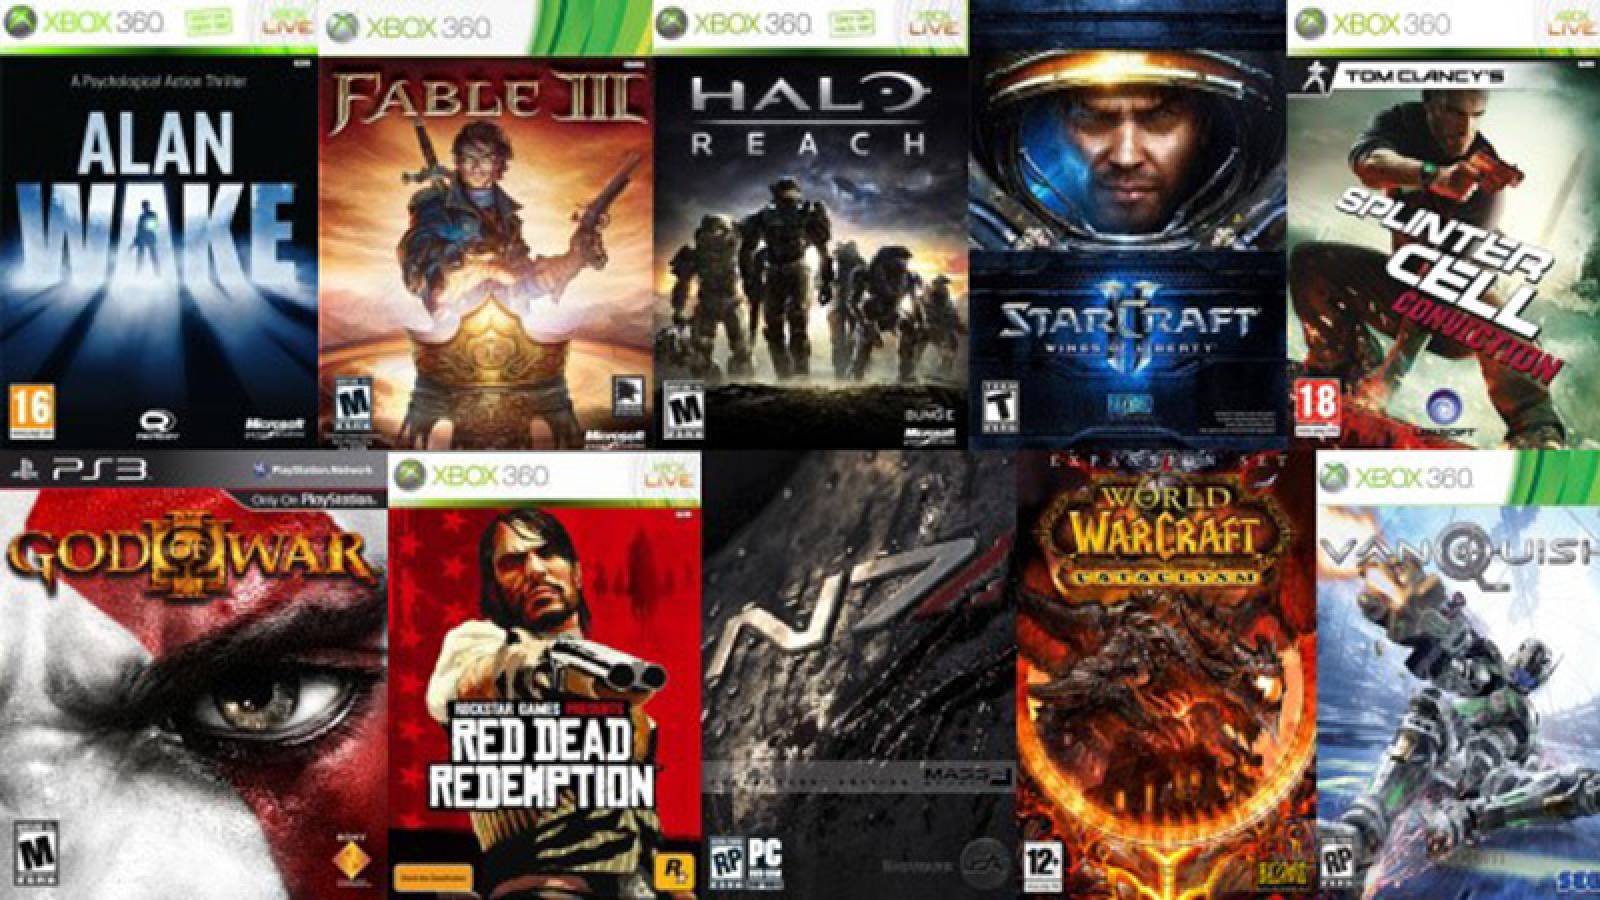 Ten years after launch, people still mention the following games